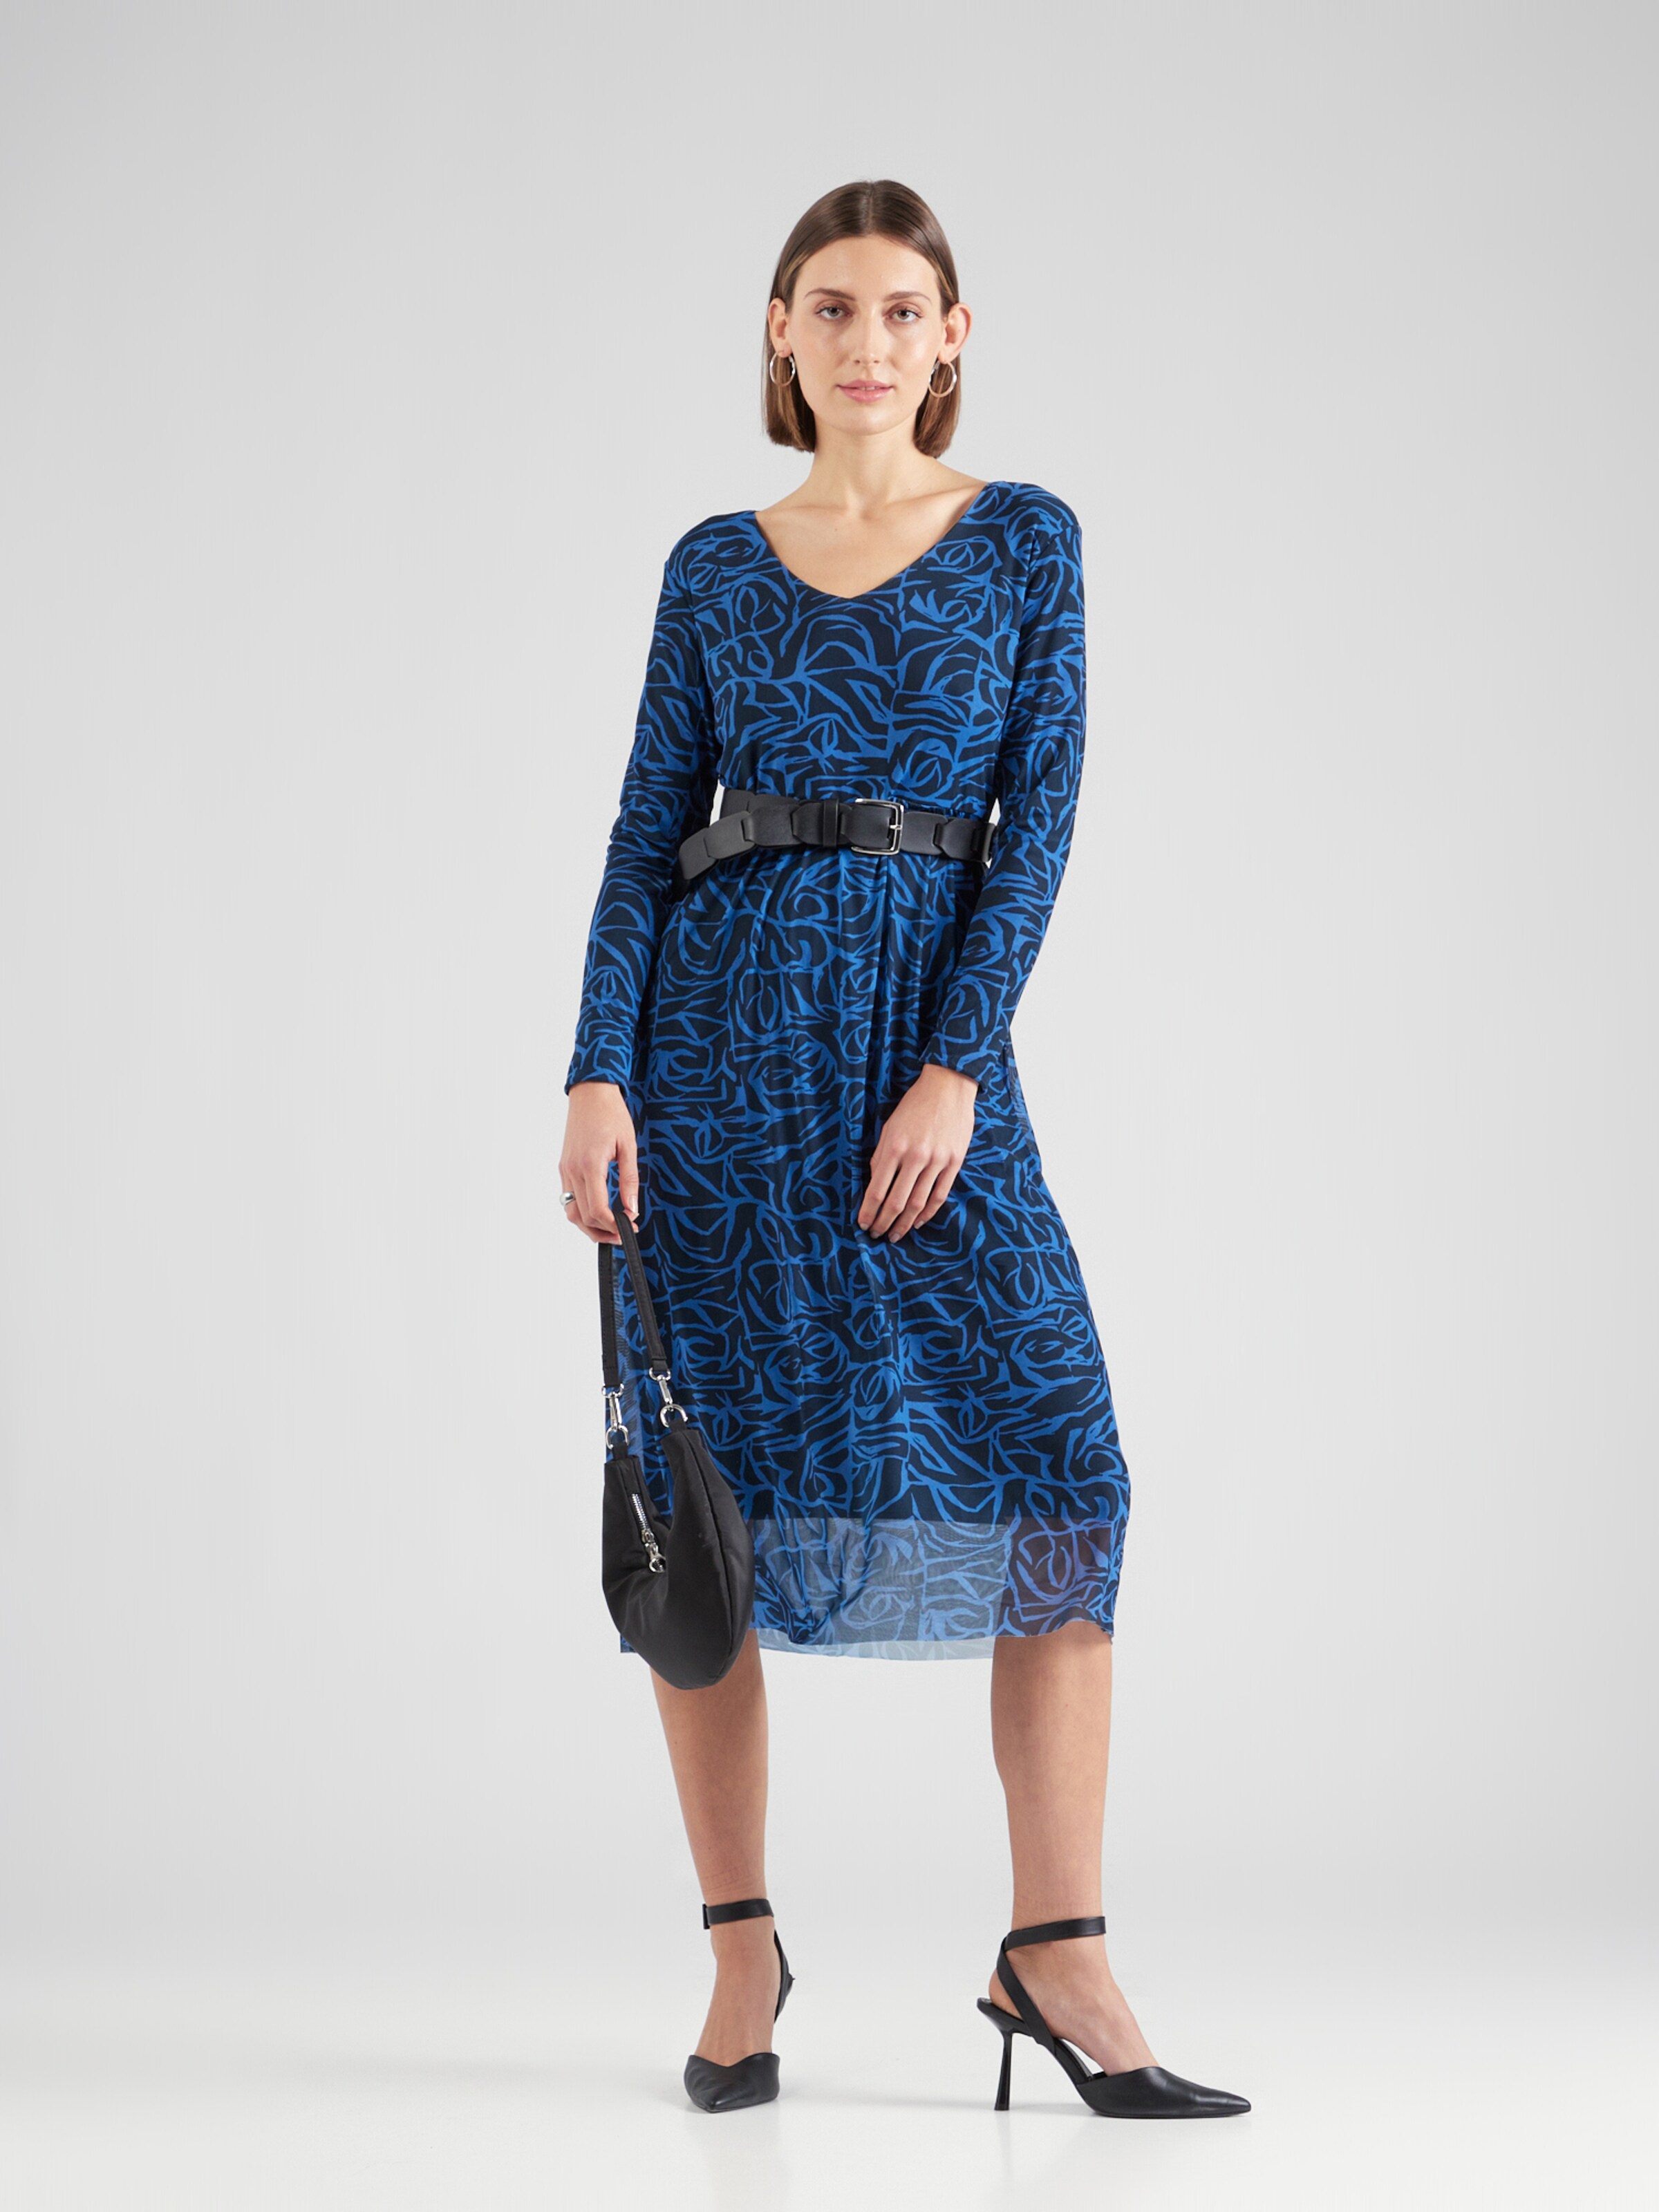 ZABAIONE Dress 'Ca44ssi' in Navy, Light Blue | ABOUT YOU